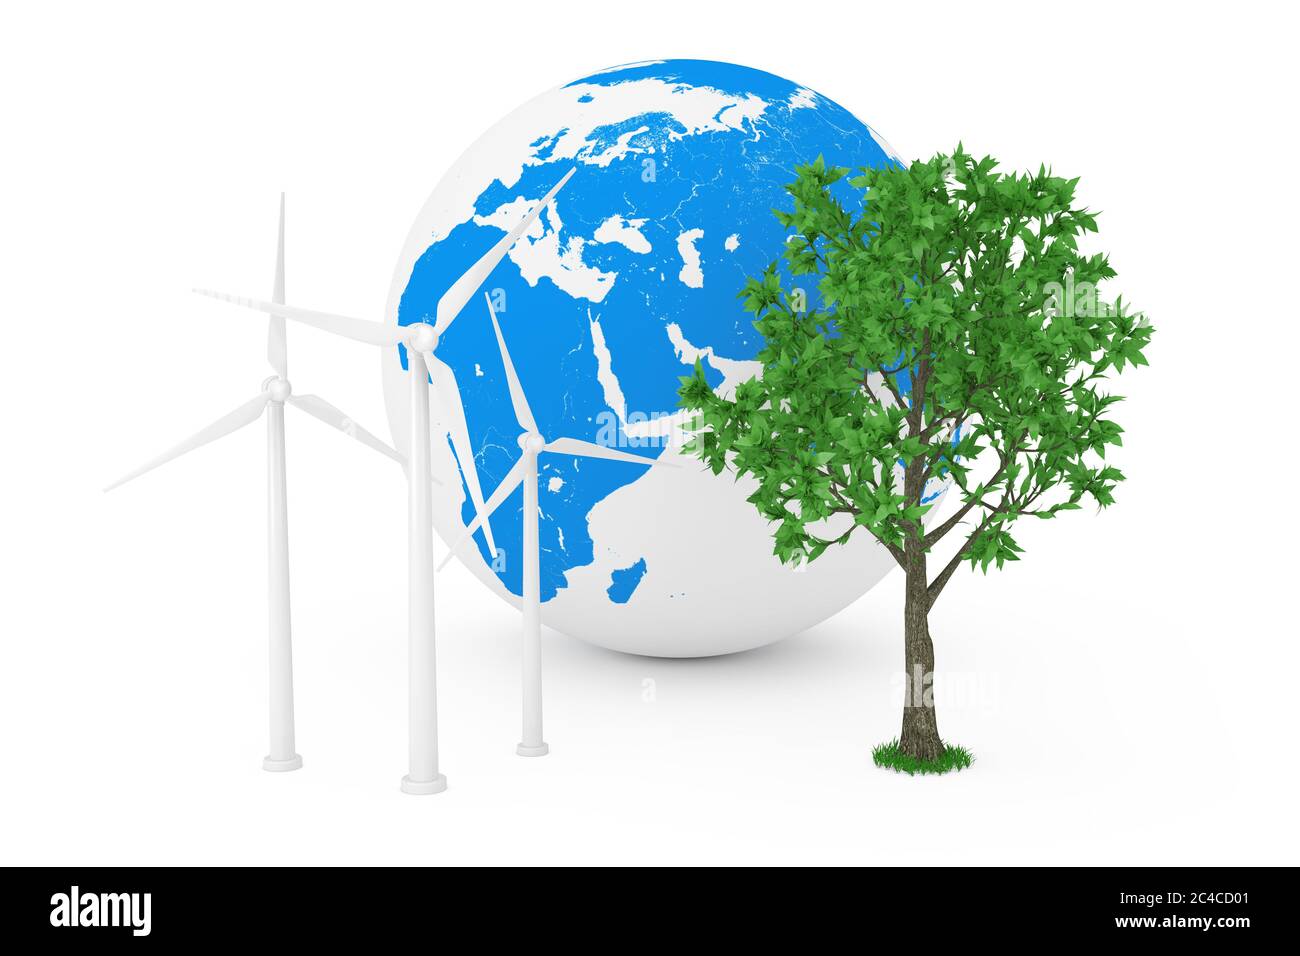 Ecological Energy Concept. Wind Turbine Windmills, Earth Globe and Green Tree on a white background. 3d Rendering Stock Photo